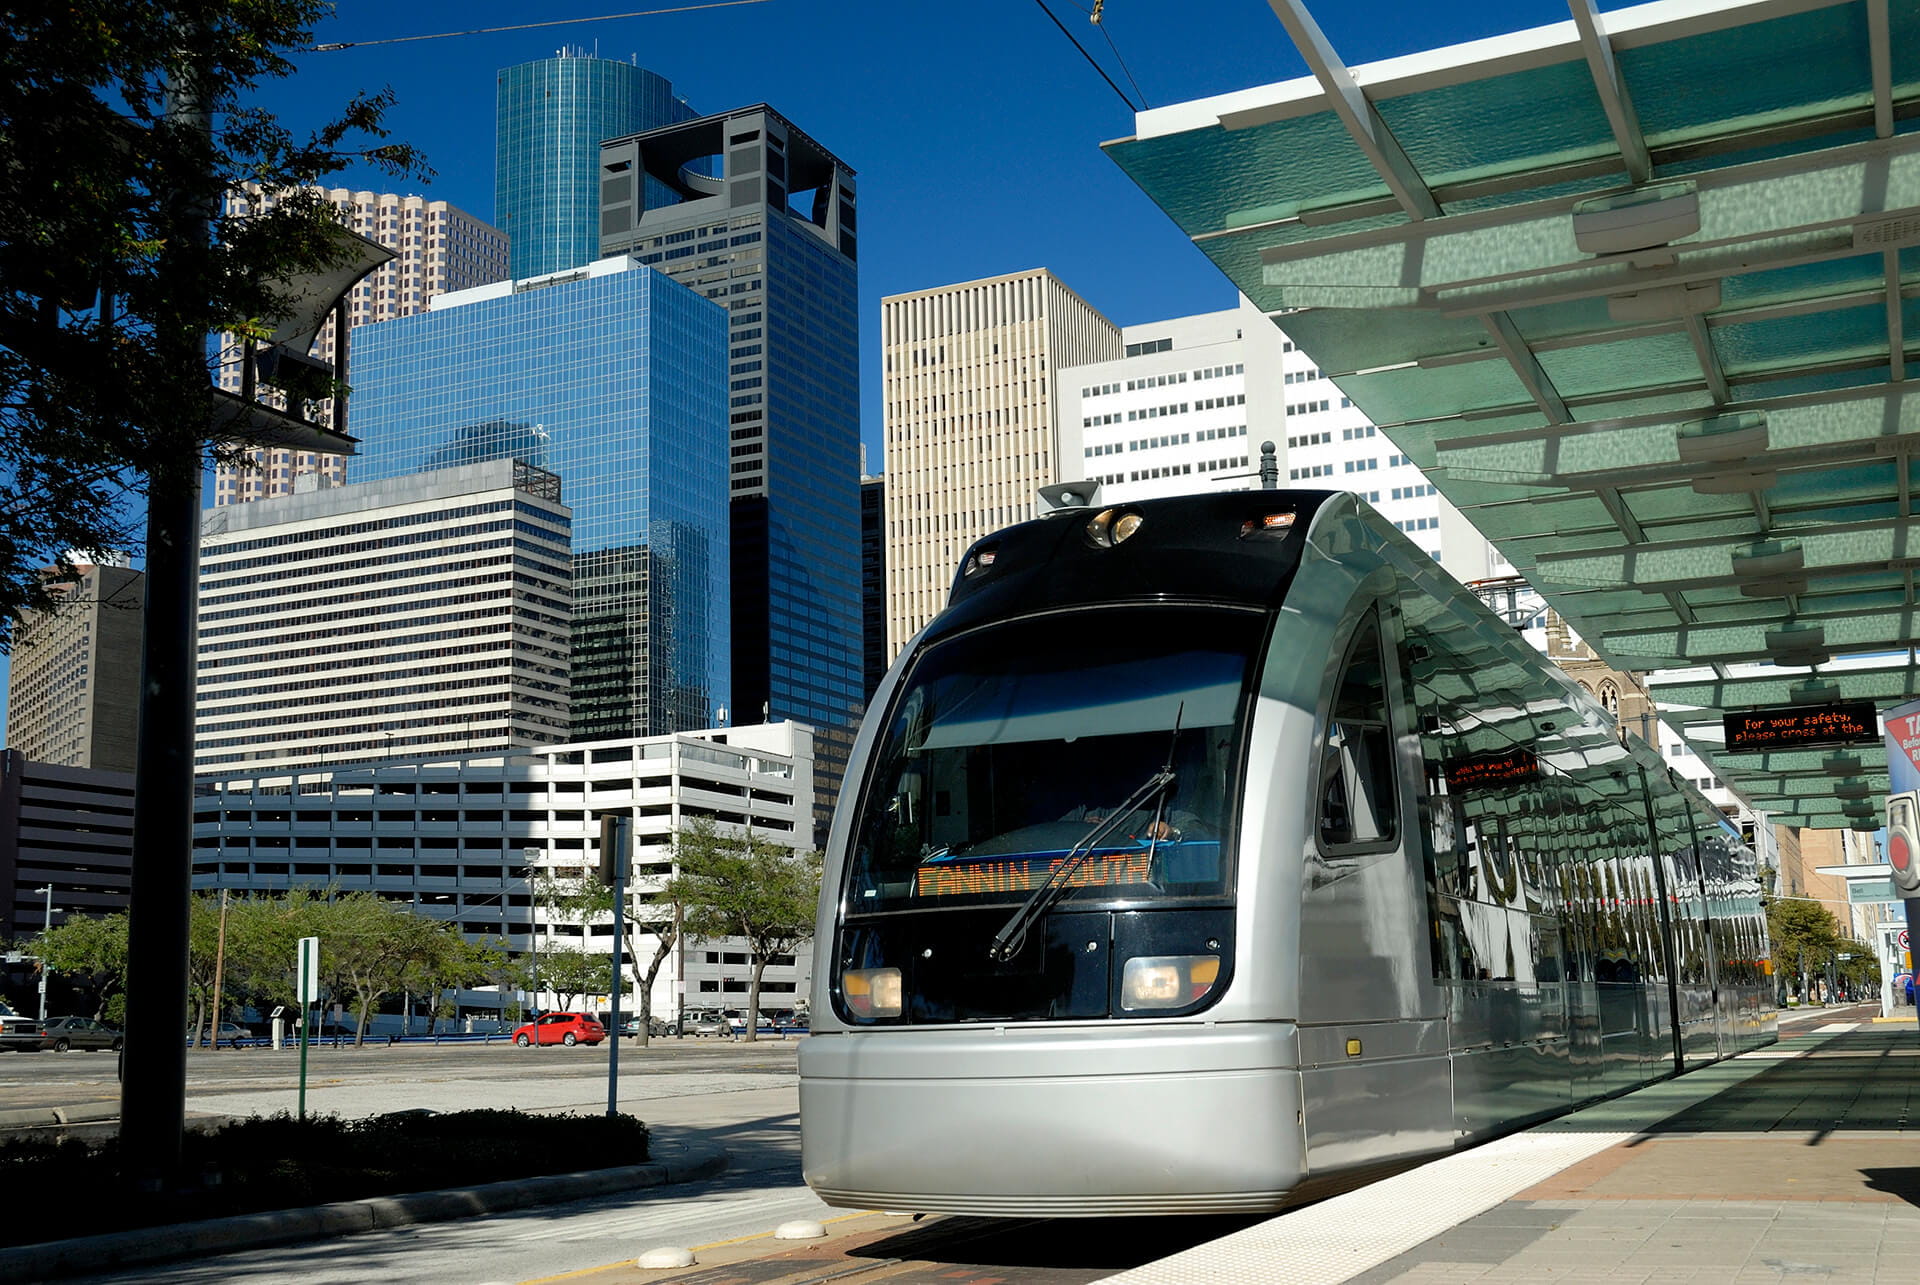 Metro Train at Platform With Modern Skyscrapers In Background